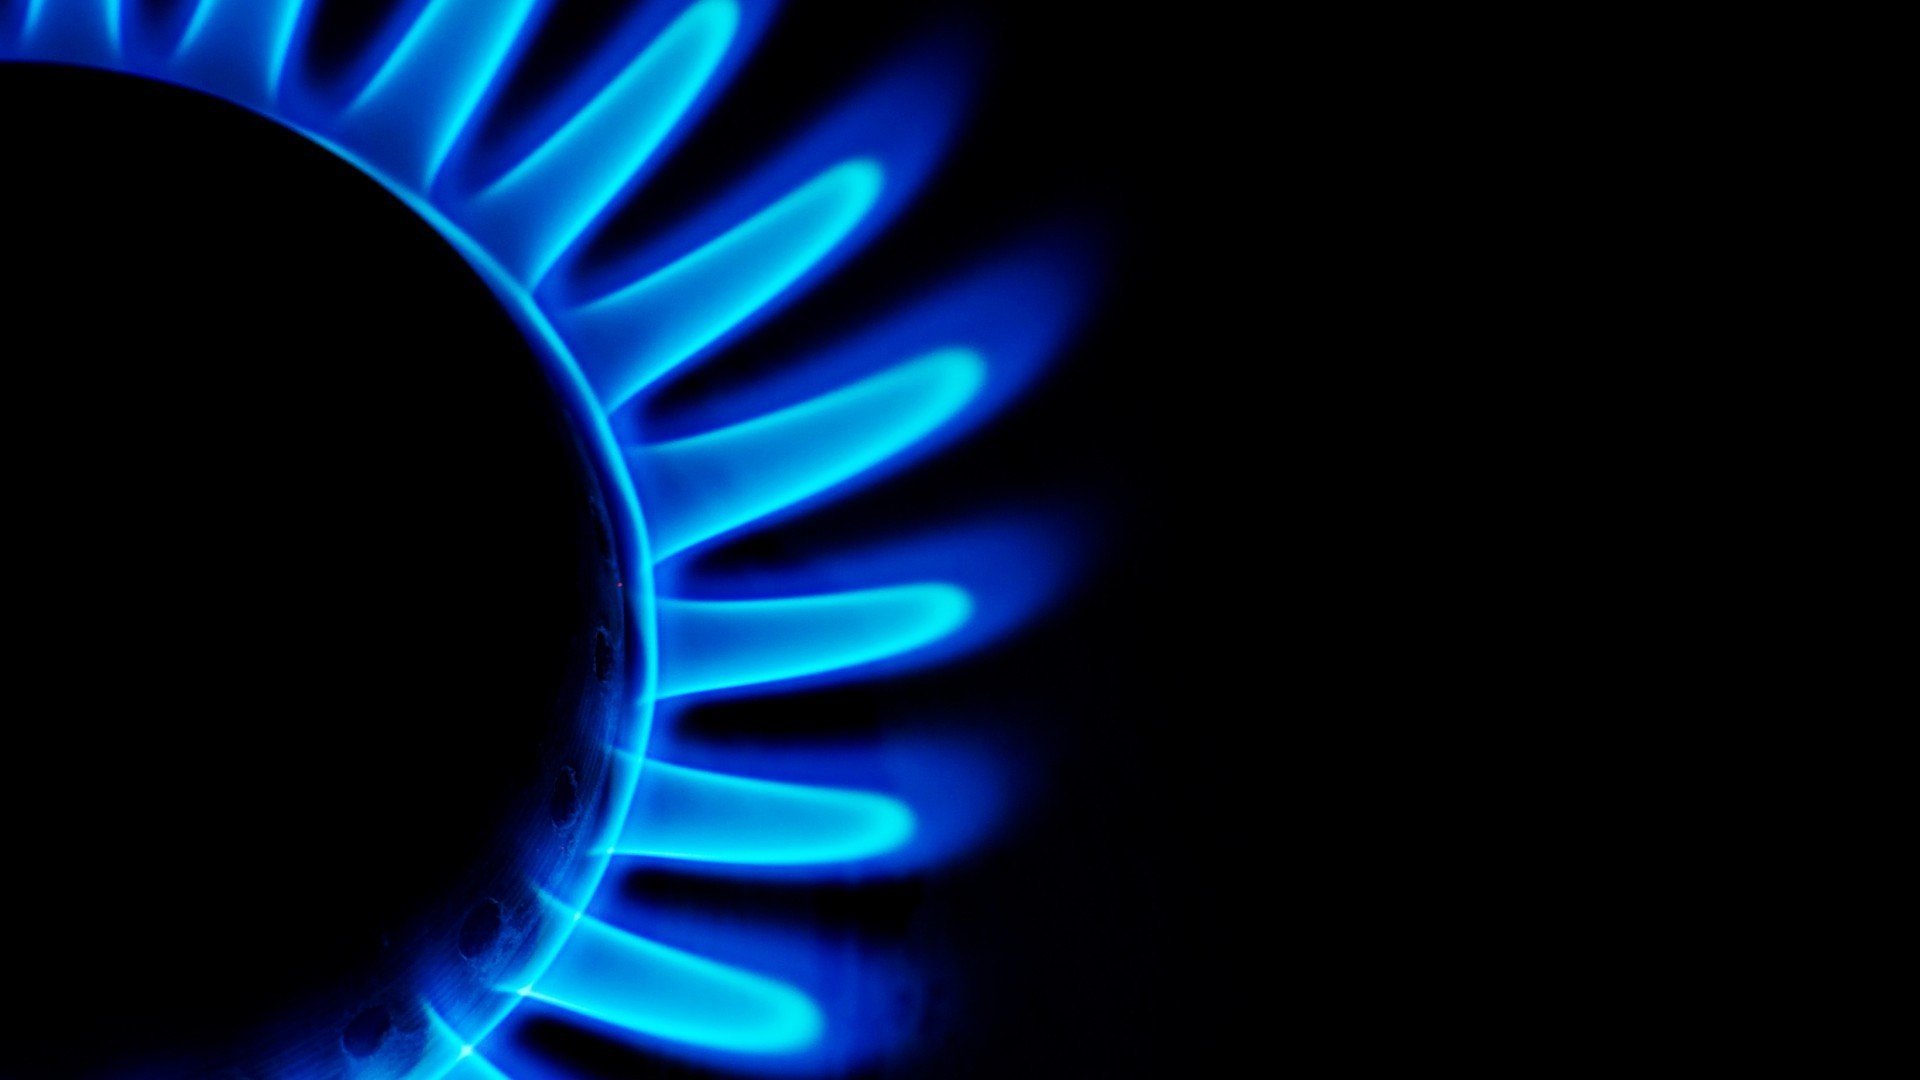 simple background, Circle, Fire, Blue flames, Black background, Minimalism, Blue, Simple Wallpaper